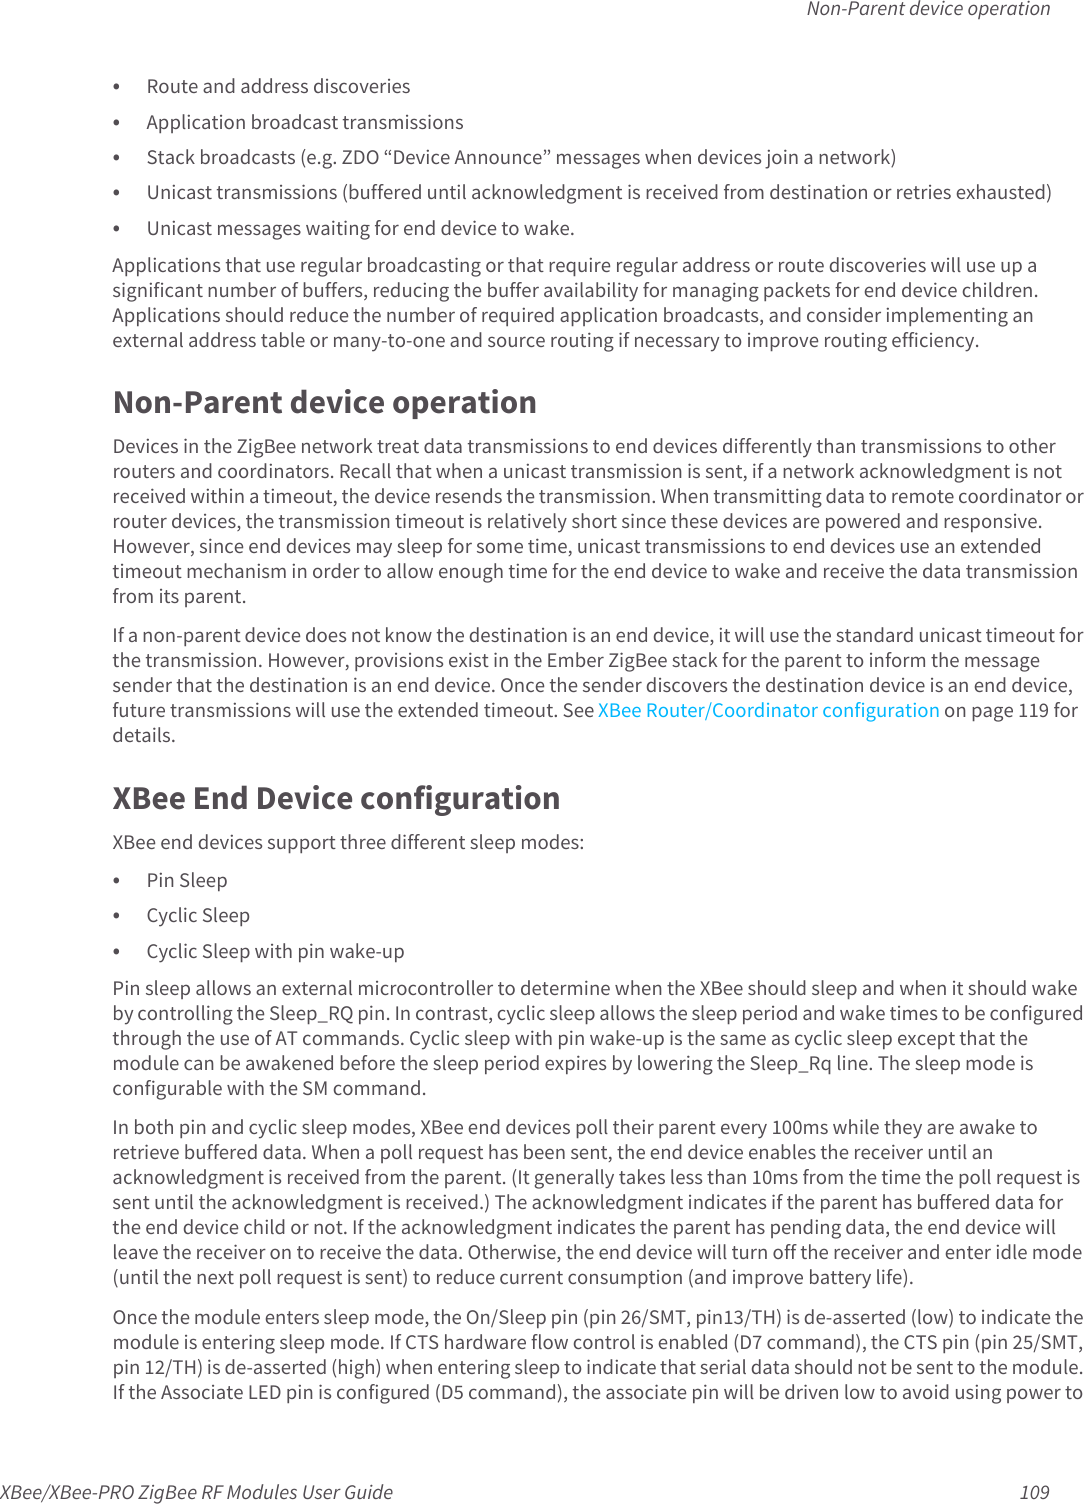 Non-Parent device operationXBee/XBee-PRO ZigBee RF Modules User Guide 109• Route and address discoveries• Application broadcast transmissions• Stack broadcasts (e.g. ZDO “Device Announce” messages when devices join a network) • Unicast transmissions (buffered until acknowledgment is received from destination or retries exhausted)• Unicast messages waiting for end device to wake.Applications that use regular broadcasting or that require regular address or route discoveries will use up a significant number of buffers, reducing the buffer availability for managing packets for end device children. Applications should reduce the number of required application broadcasts, and consider implementing an external address table or many-to-one and source routing if necessary to improve routing efficiency.Non-Parent device operationDevices in the ZigBee network treat data transmissions to end devices differently than transmissions to other routers and coordinators. Recall that when a unicast transmission is sent, if a network acknowledgment is not received within a timeout, the device resends the transmission. When transmitting data to remote coordinator or router devices, the transmission timeout is relatively short since these devices are powered and responsive. However, since end devices may sleep for some time, unicast transmissions to end devices use an extended timeout mechanism in order to allow enough time for the end device to wake and receive the data transmission from its parent.If a non-parent device does not know the destination is an end device, it will use the standard unicast timeout for the transmission. However, provisions exist in the Ember ZigBee stack for the parent to inform the message sender that the destination is an end device. Once the sender discovers the destination device is an end device, future transmissions will use the extended timeout. See XBee Router/Coordinator configuration on page 119 for details.XBee End Device configurationXBee end devices support three different sleep modes:• Pin Sleep• Cyclic Sleep• Cyclic Sleep with pin wake-upPin sleep allows an external microcontroller to determine when the XBee should sleep and when it should wake by controlling the Sleep_RQ pin. In contrast, cyclic sleep allows the sleep period and wake times to be configured through the use of AT commands. Cyclic sleep with pin wake-up is the same as cyclic sleep except that the module can be awakened before the sleep period expires by lowering the Sleep_Rq line. The sleep mode is configurable with the SM command.In both pin and cyclic sleep modes, XBee end devices poll their parent every 100ms while they are awake to retrieve buffered data. When a poll request has been sent, the end device enables the receiver until an acknowledgment is received from the parent. (It generally takes less than 10ms from the time the poll request is sent until the acknowledgment is received.) The acknowledgment indicates if the parent has buffered data for the end device child or not. If the acknowledgment indicates the parent has pending data, the end device will leave the receiver on to receive the data. Otherwise, the end device will turn off the receiver and enter idle mode (until the next poll request is sent) to reduce current consumption (and improve battery life). Once the module enters sleep mode, the On/Sleep pin (pin 26/SMT, pin13/TH) is de-asserted (low) to indicate the module is entering sleep mode. If CTS hardware flow control is enabled (D7 command), the CTS pin (pin 25/SMT, pin 12/TH) is de-asserted (high) when entering sleep to indicate that serial data should not be sent to the module. If the Associate LED pin is configured (D5 command), the associate pin will be driven low to avoid using power to 